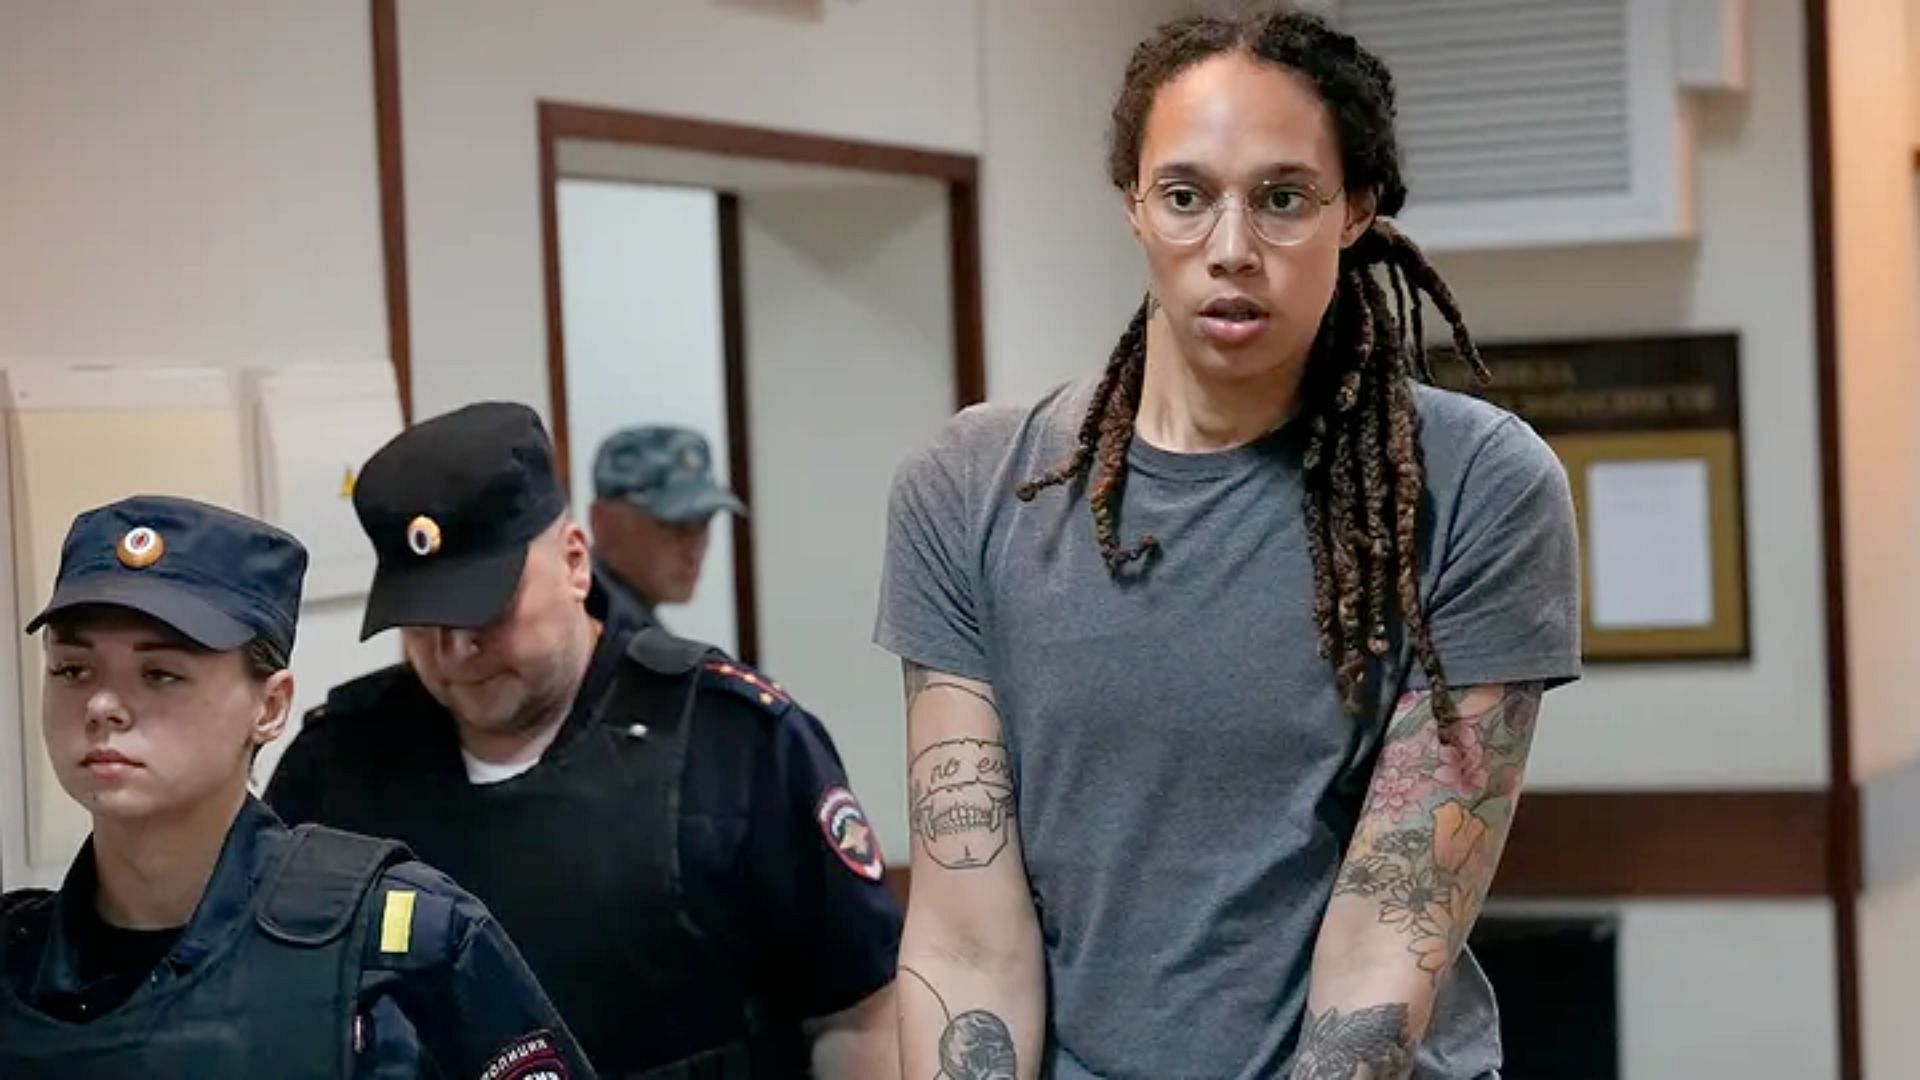 Brittney Griner being escorted after a hearing outside Moscow,. (image via Alexander Zemlianichenko)